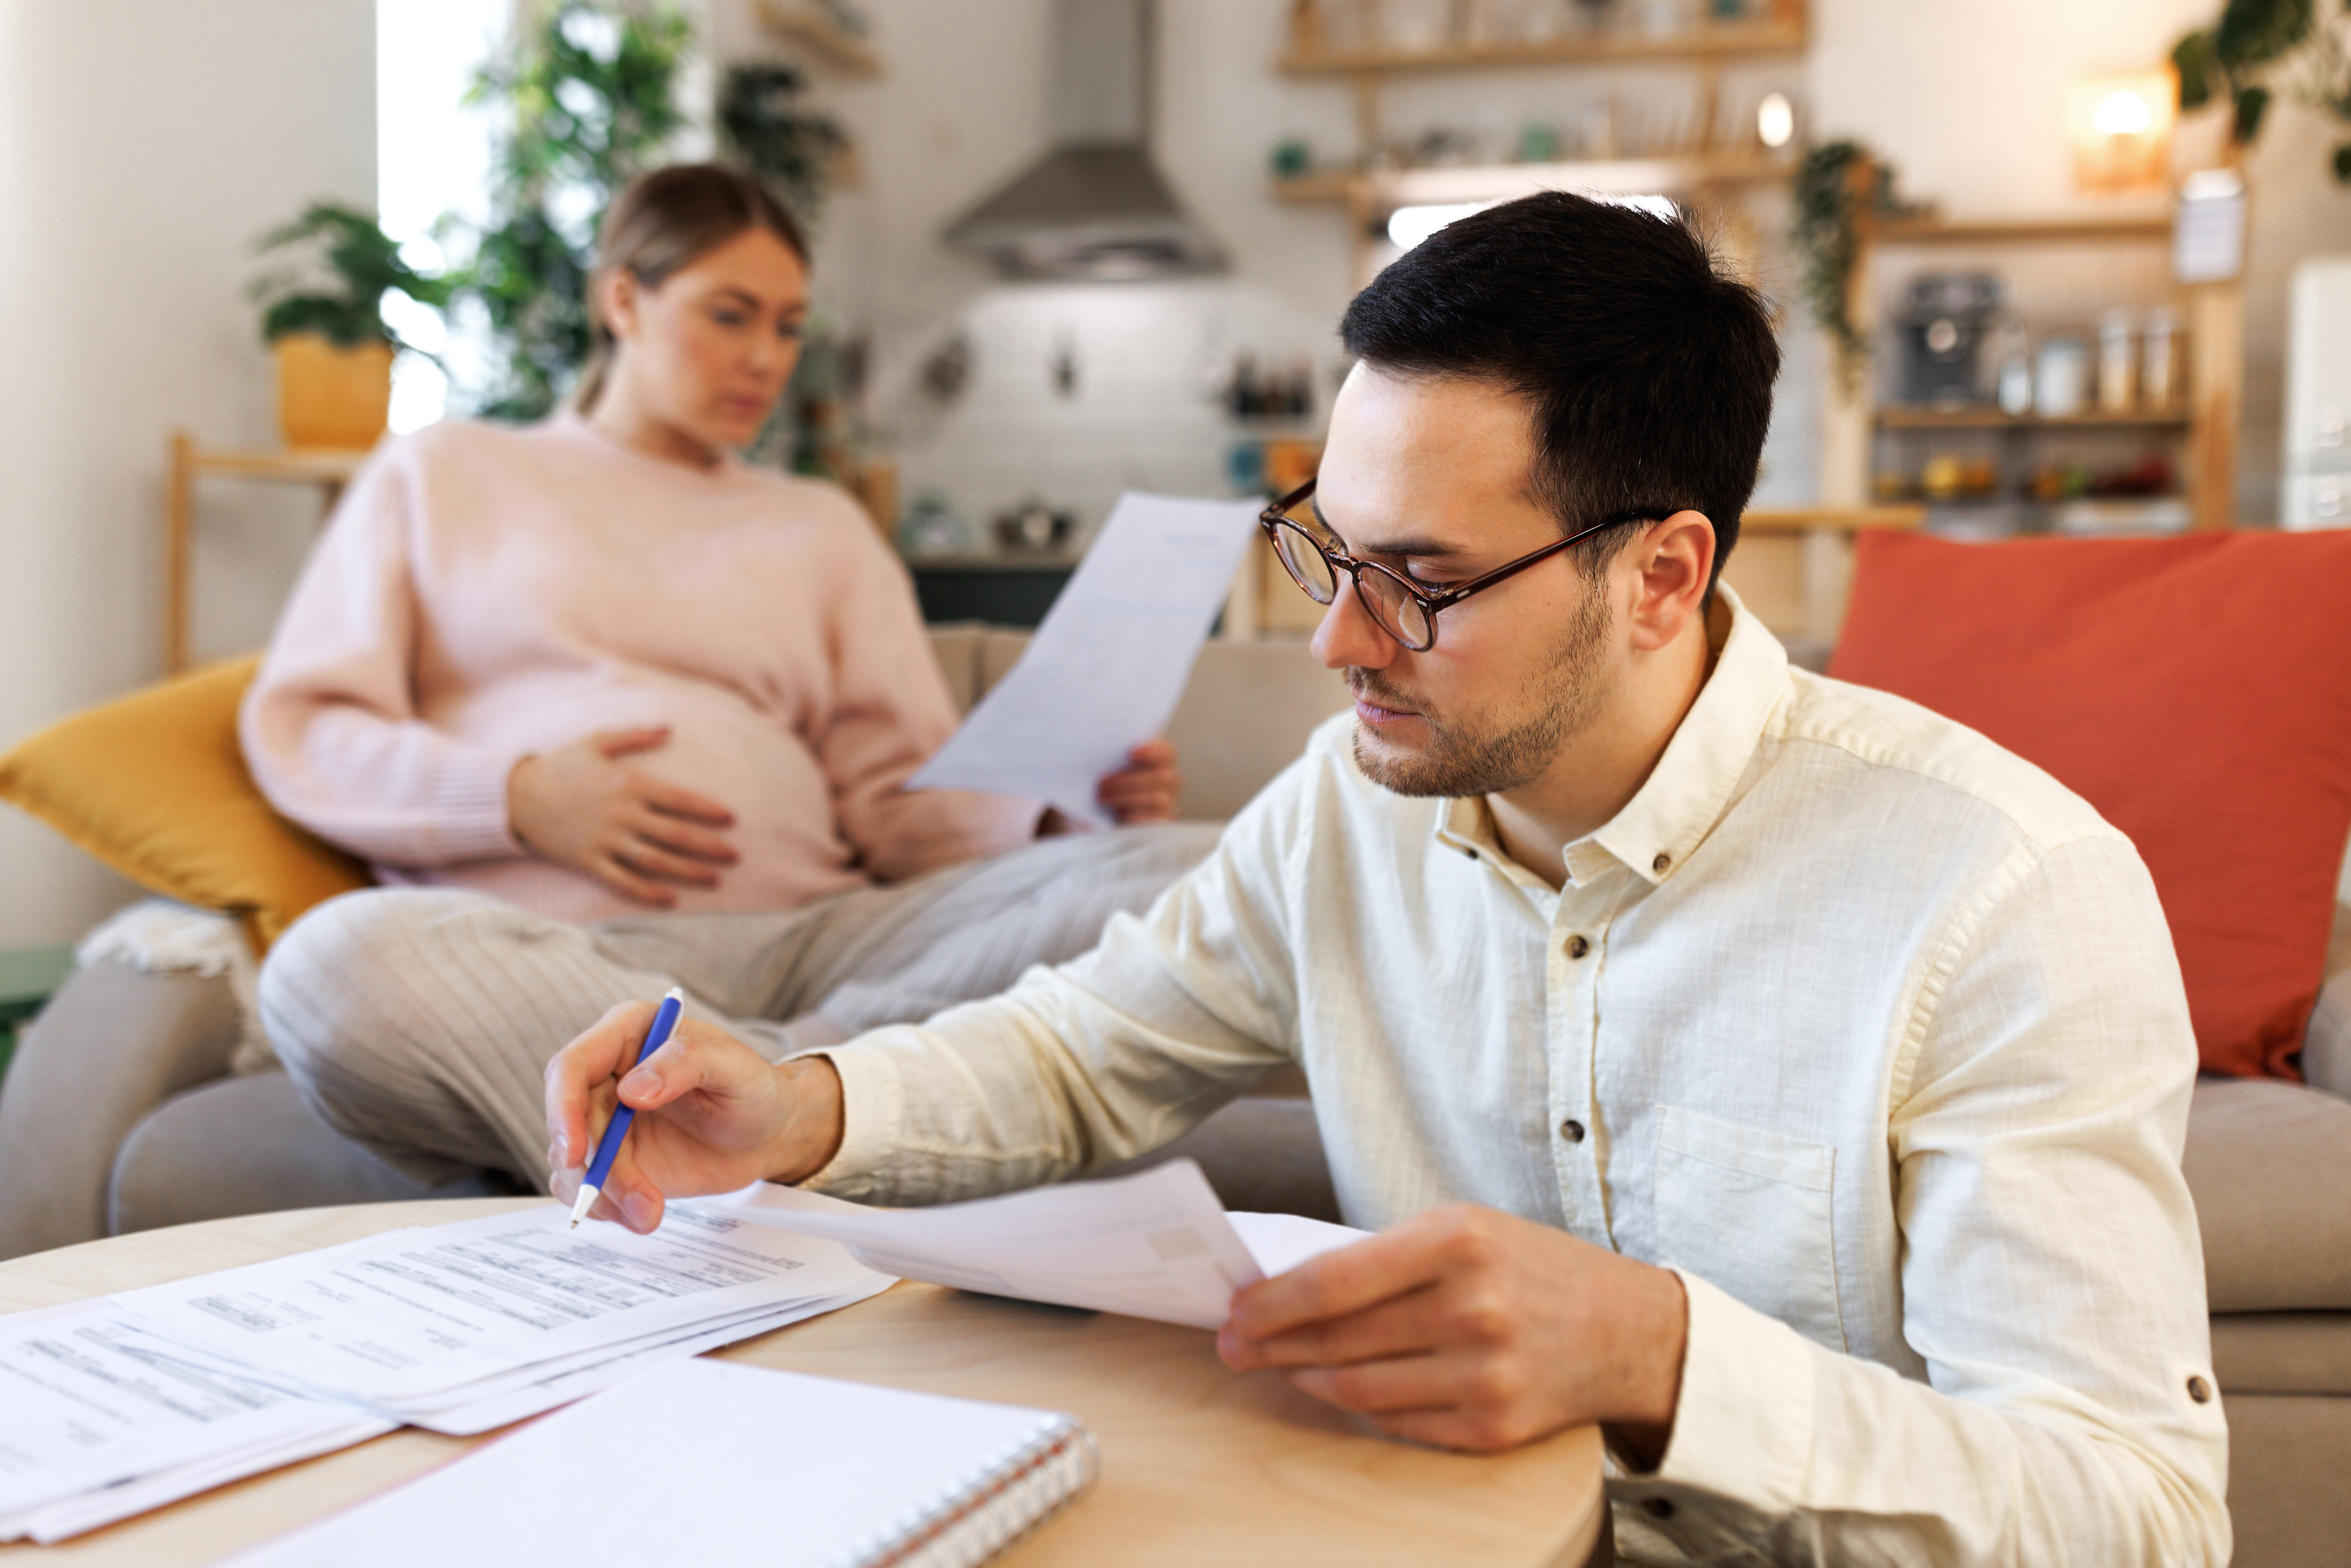 a pregnant woman in the background as her husband fills out paperwork